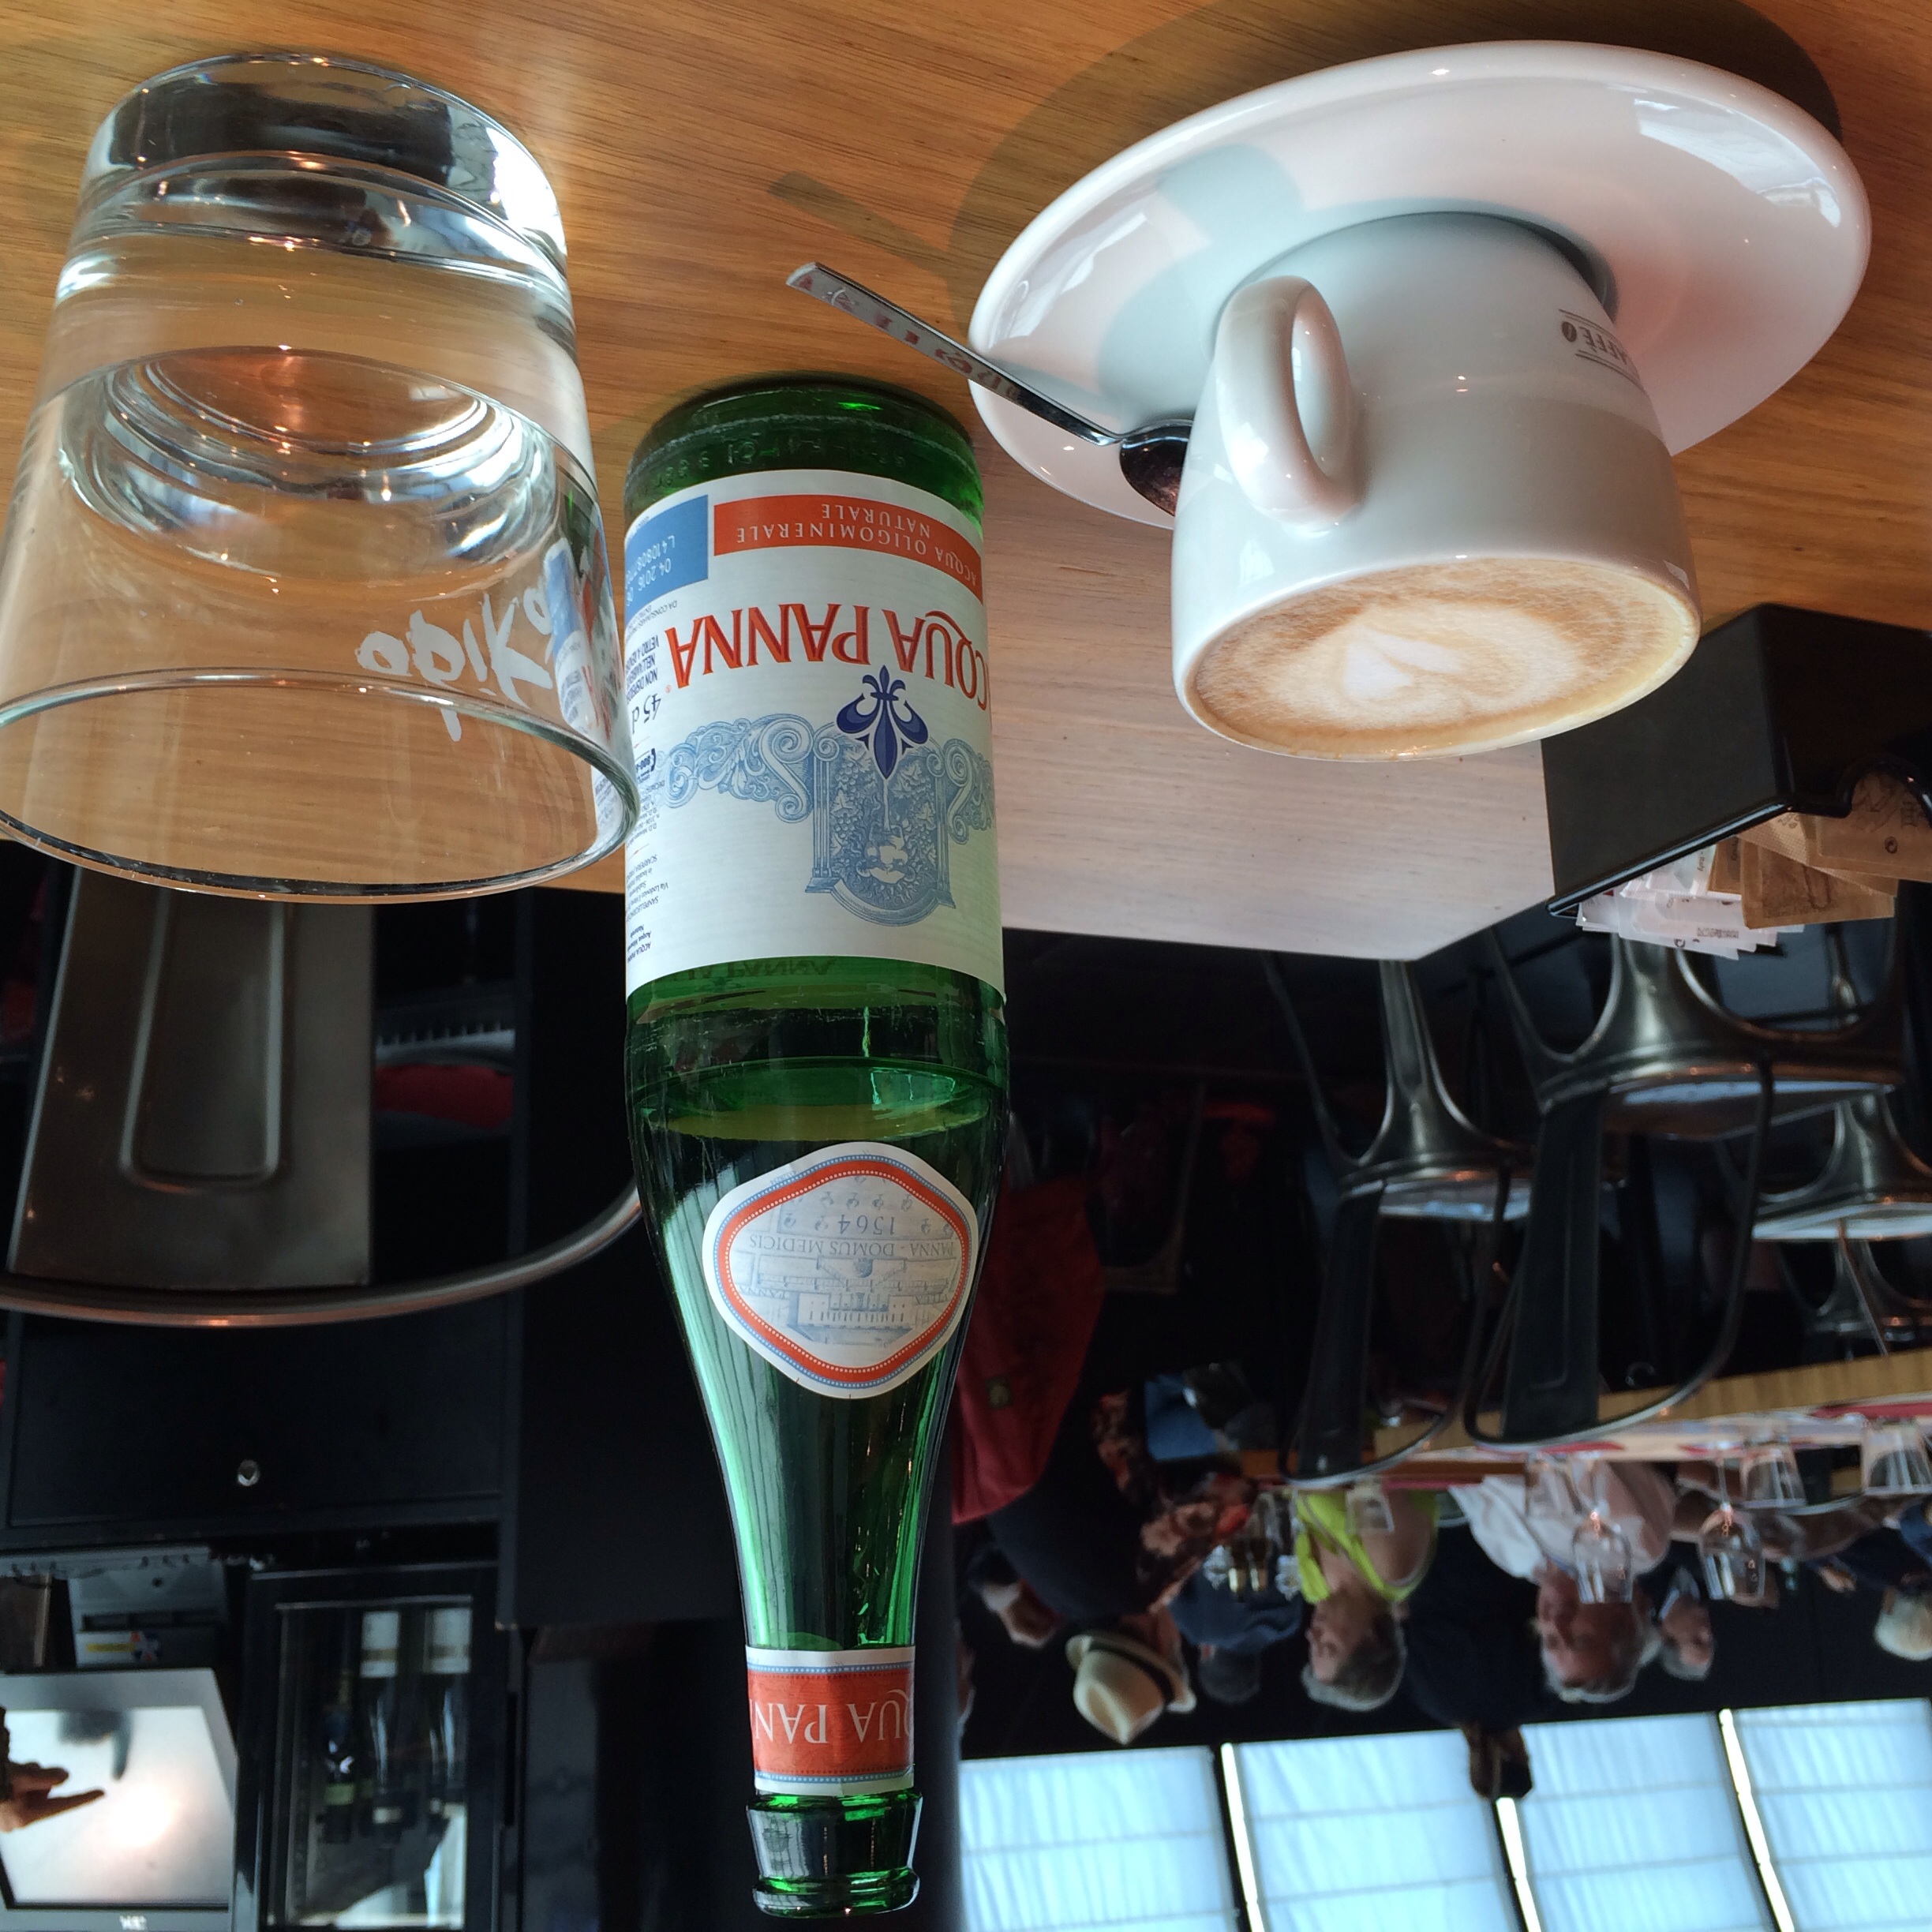 File:Cappuccino coffee and Aqua Panna mineral water on table.jpg -  Wikimedia Commons